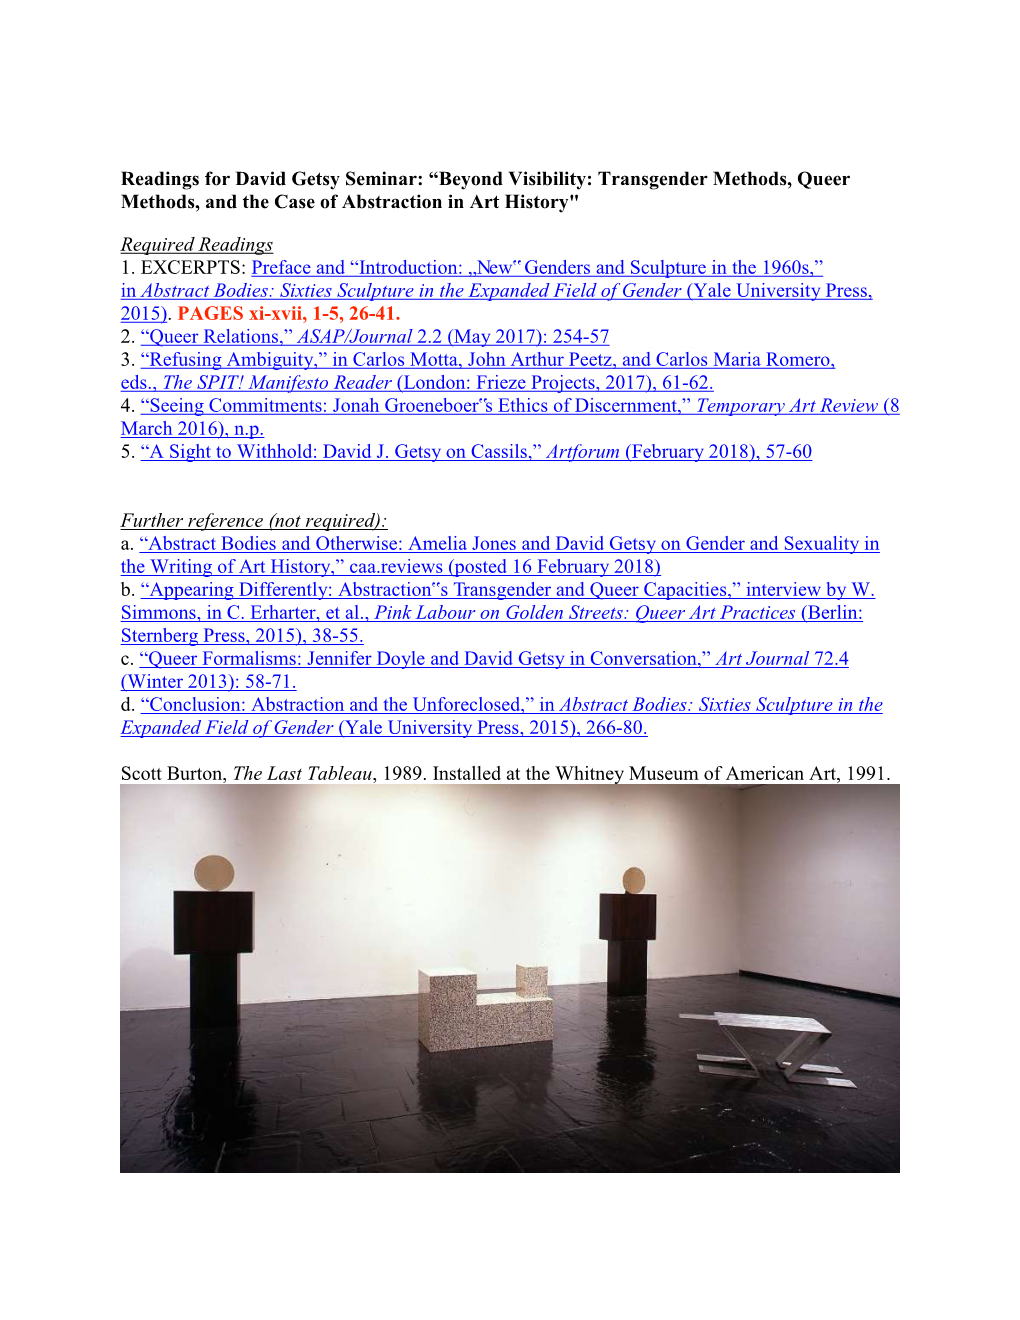 Readings for David Getsy Seminar: “Beyond Visibility: Transgender Methods, Queer Methods, and the Case of Abstraction in Art History"